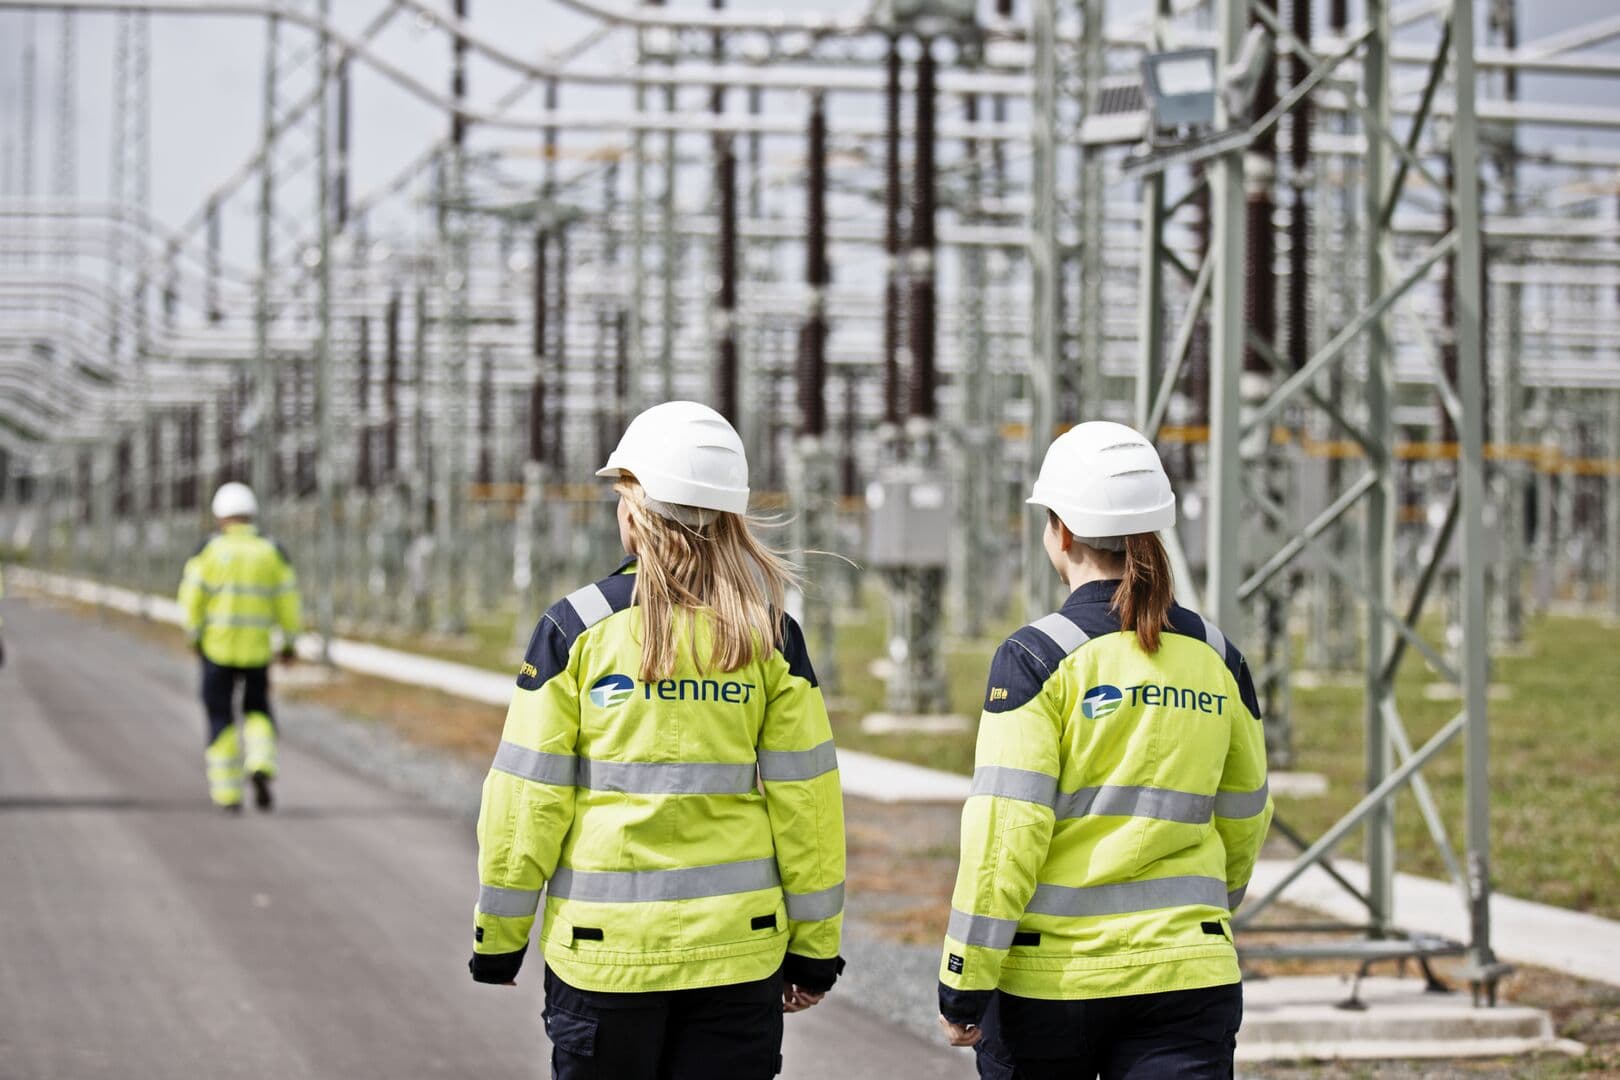 Colleagues at work at a substation